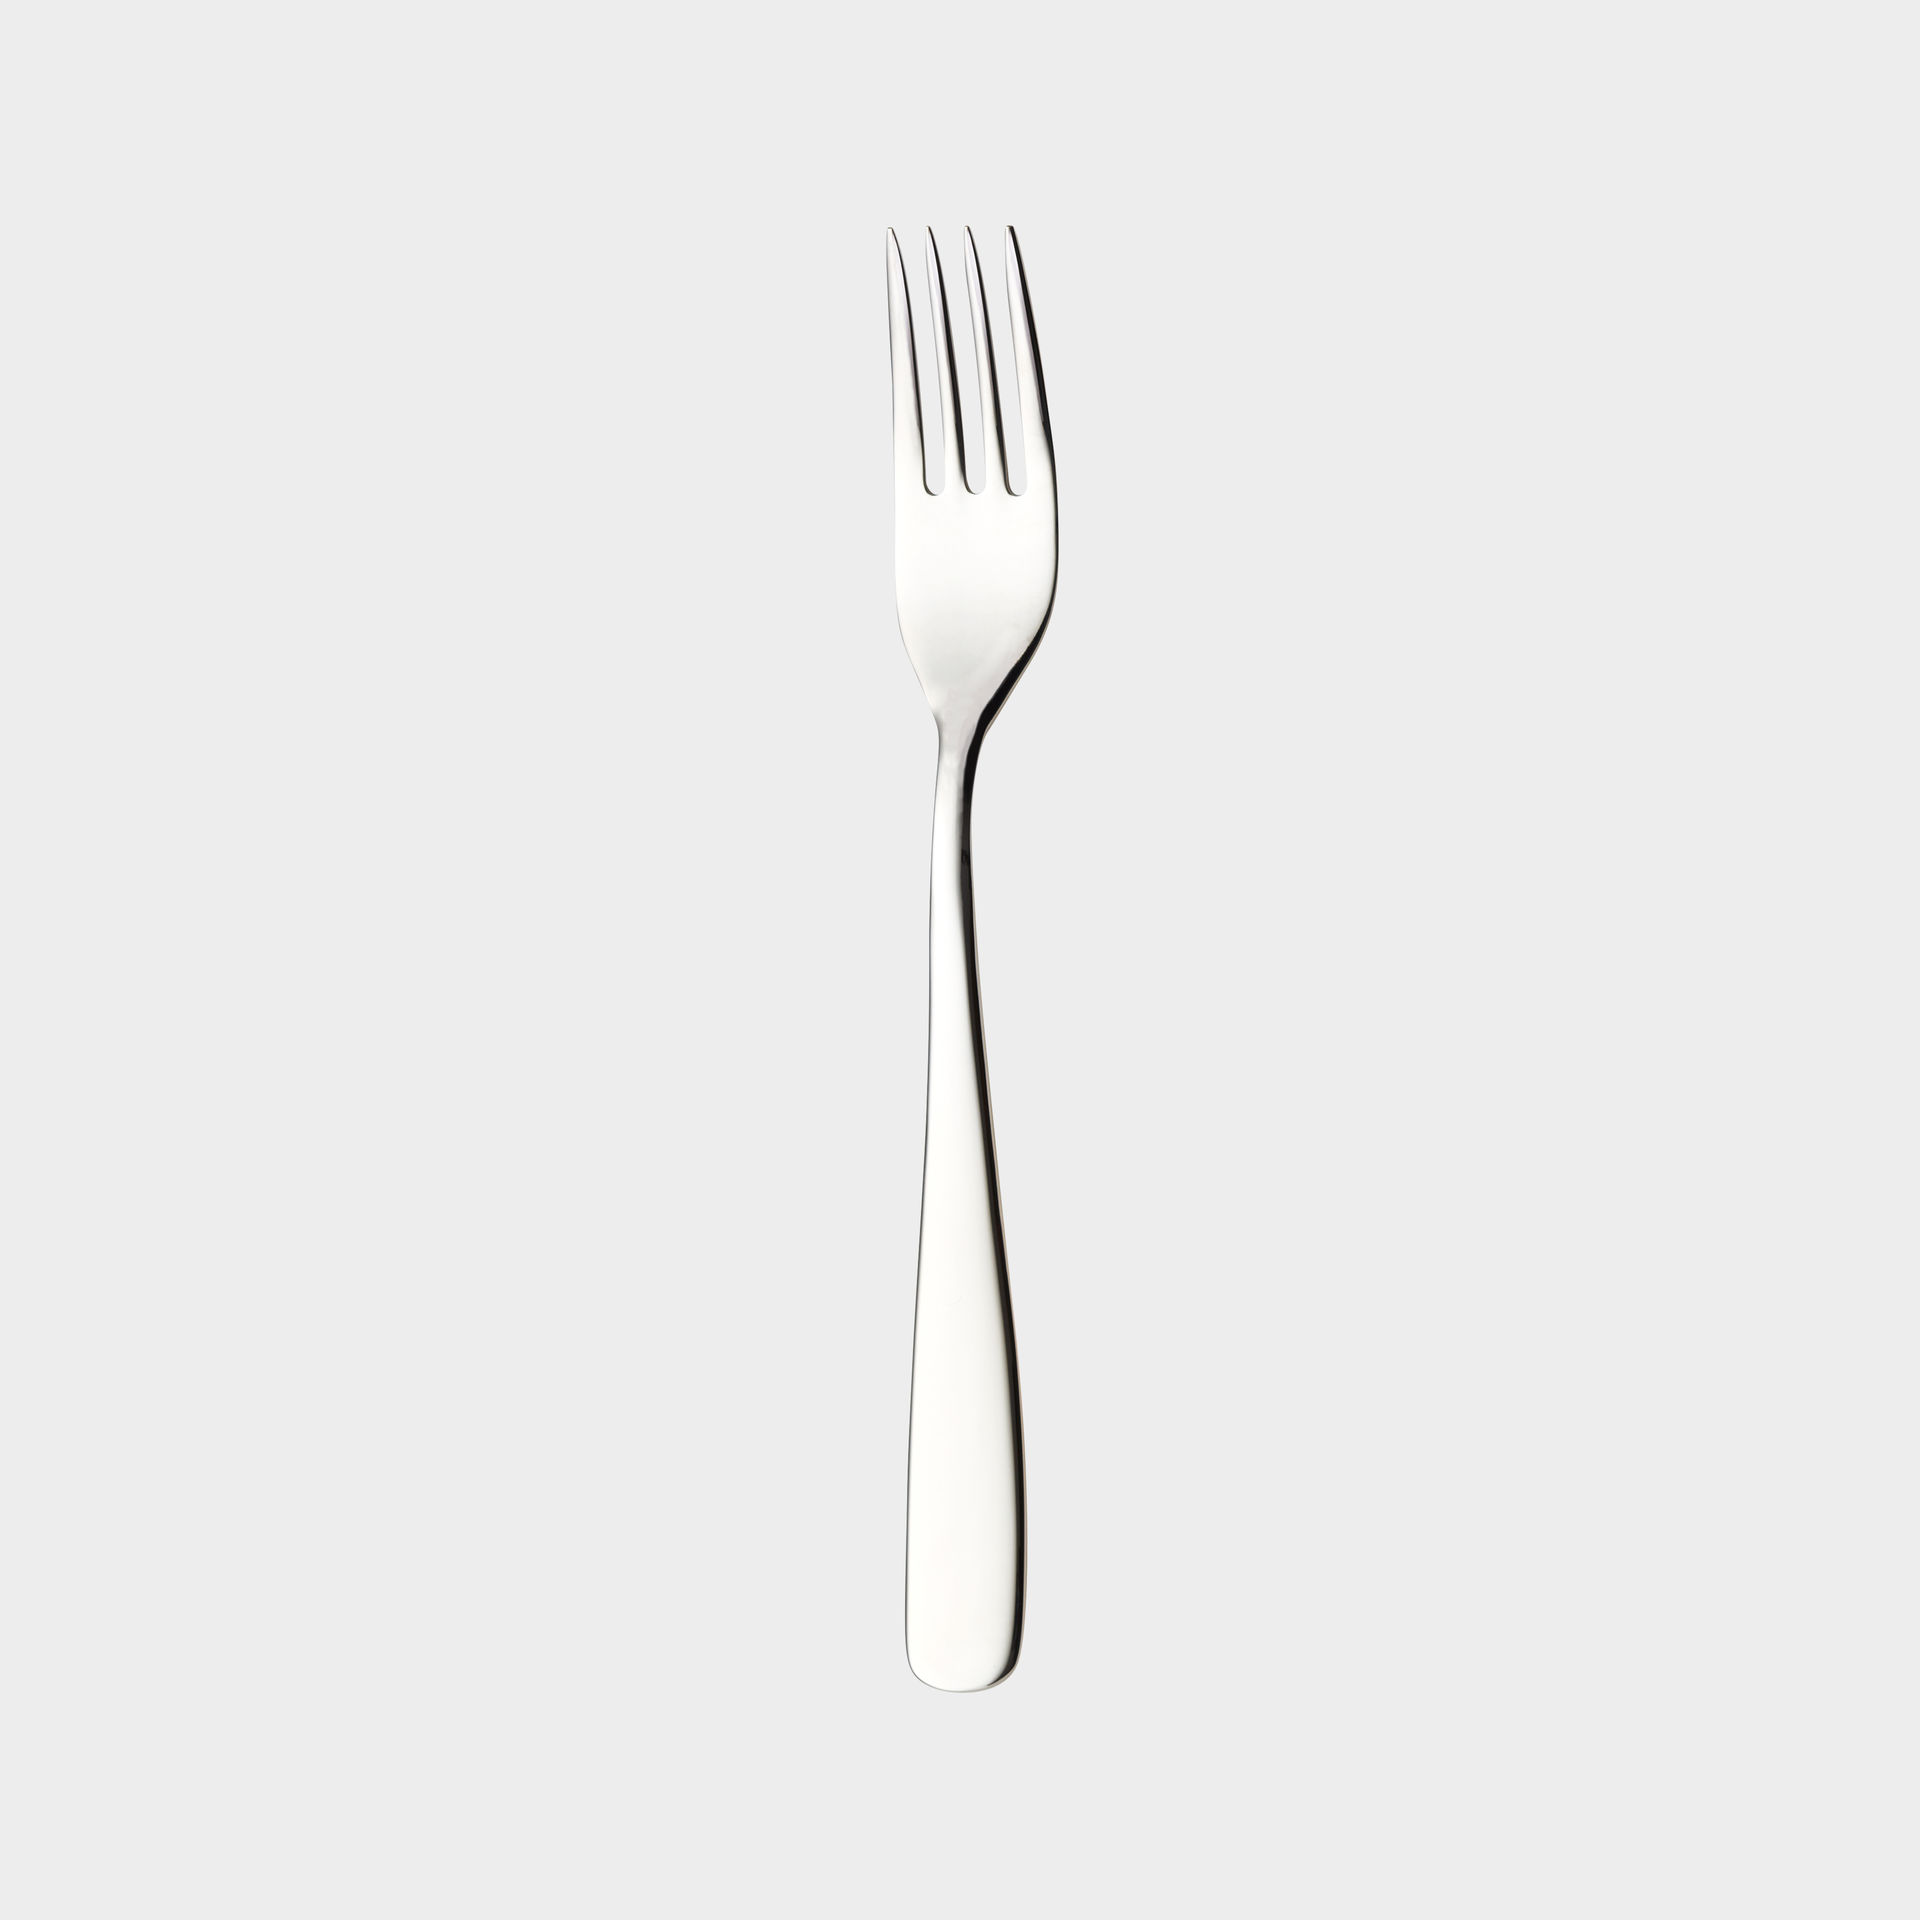 Tuva appetizer fork product image